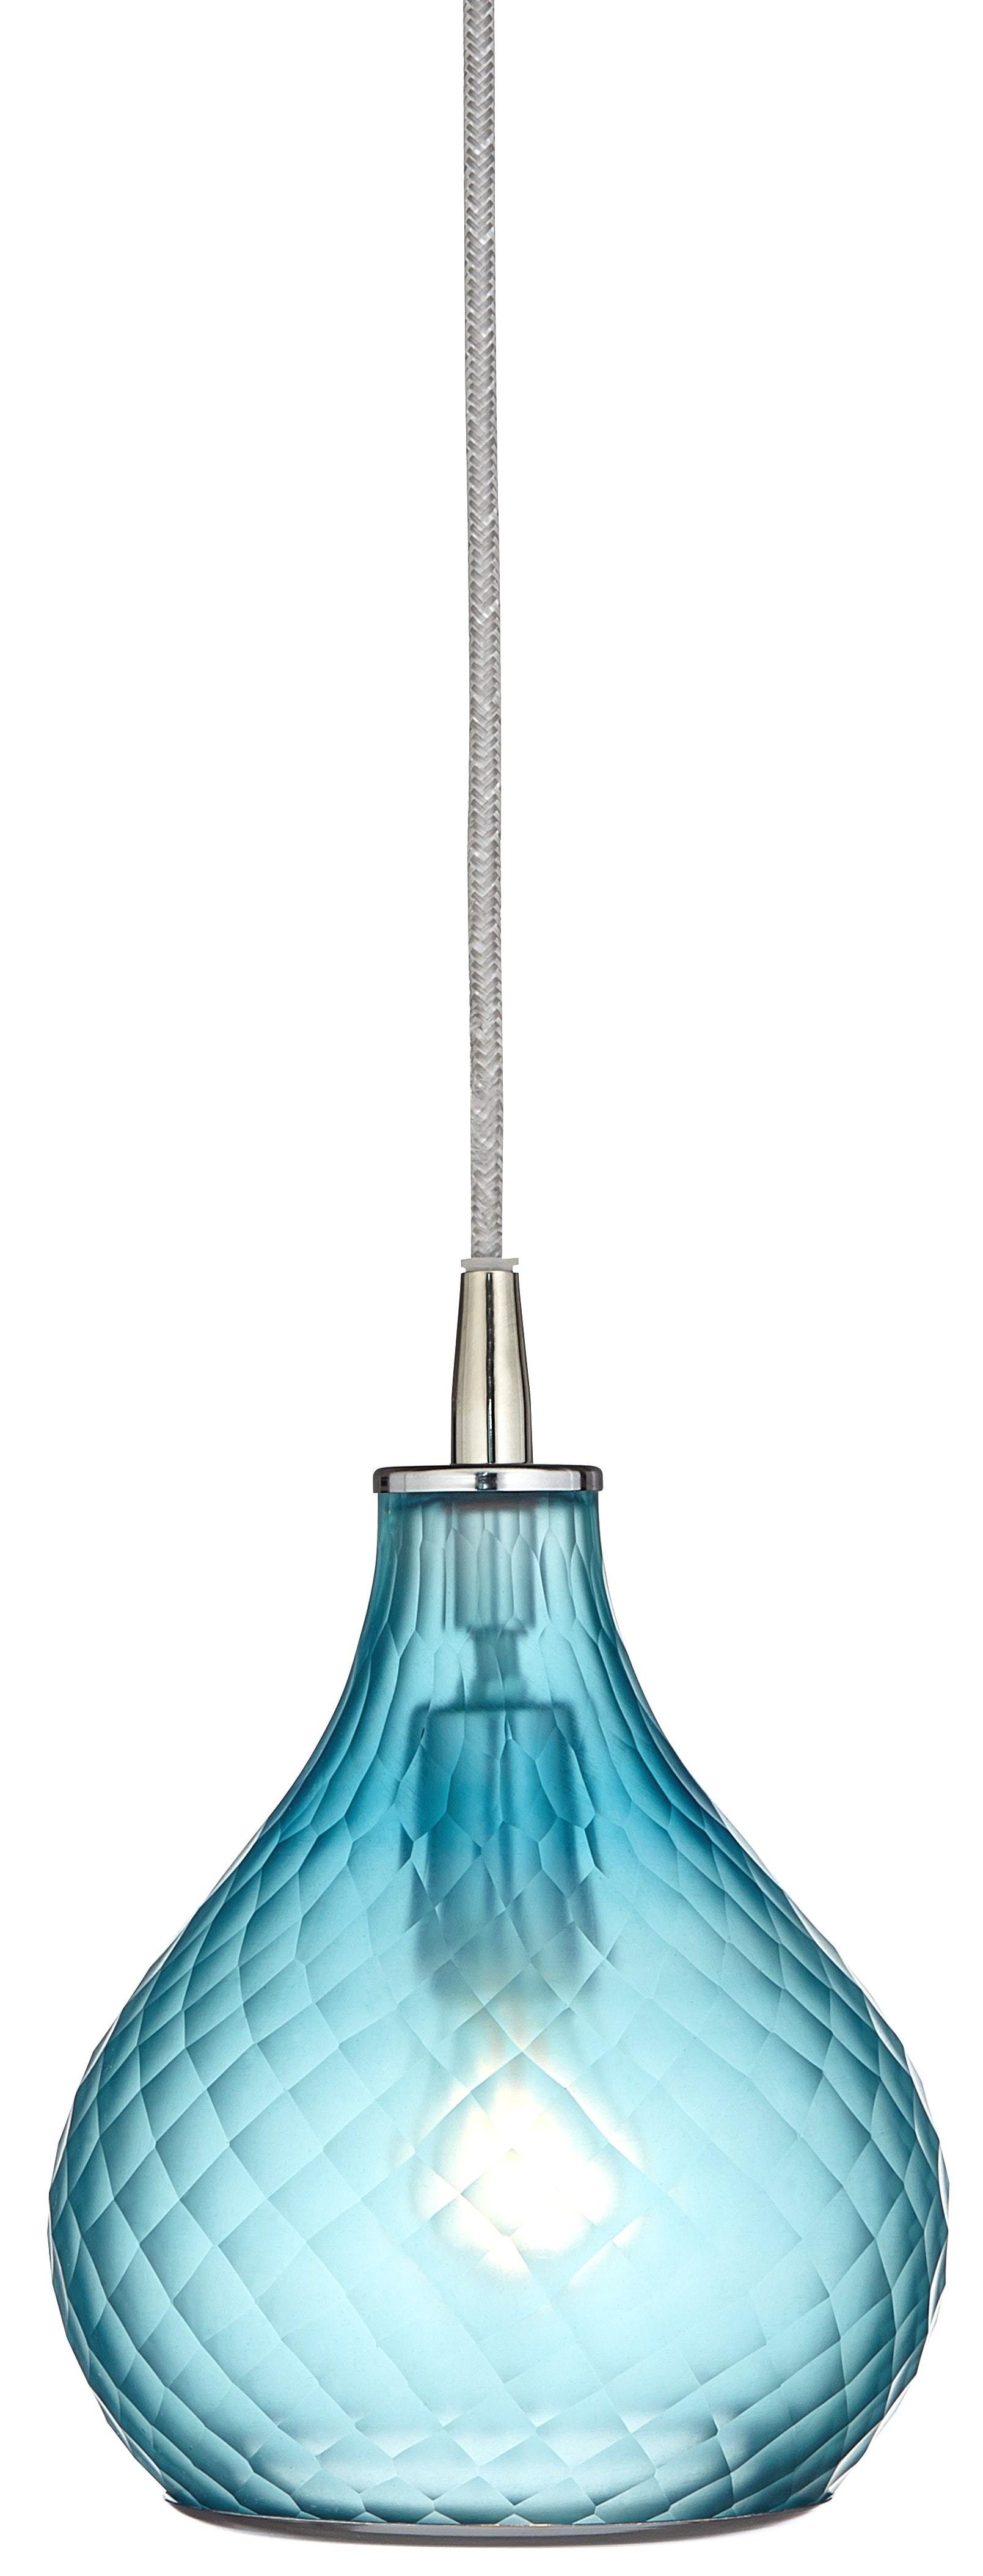 Recent Turquoise Blue Glass Chandeliers Pertaining To Pendant Lights : 42 Beautiful Plain Artistic Turquoise Blue Glass (View 17 of 20)